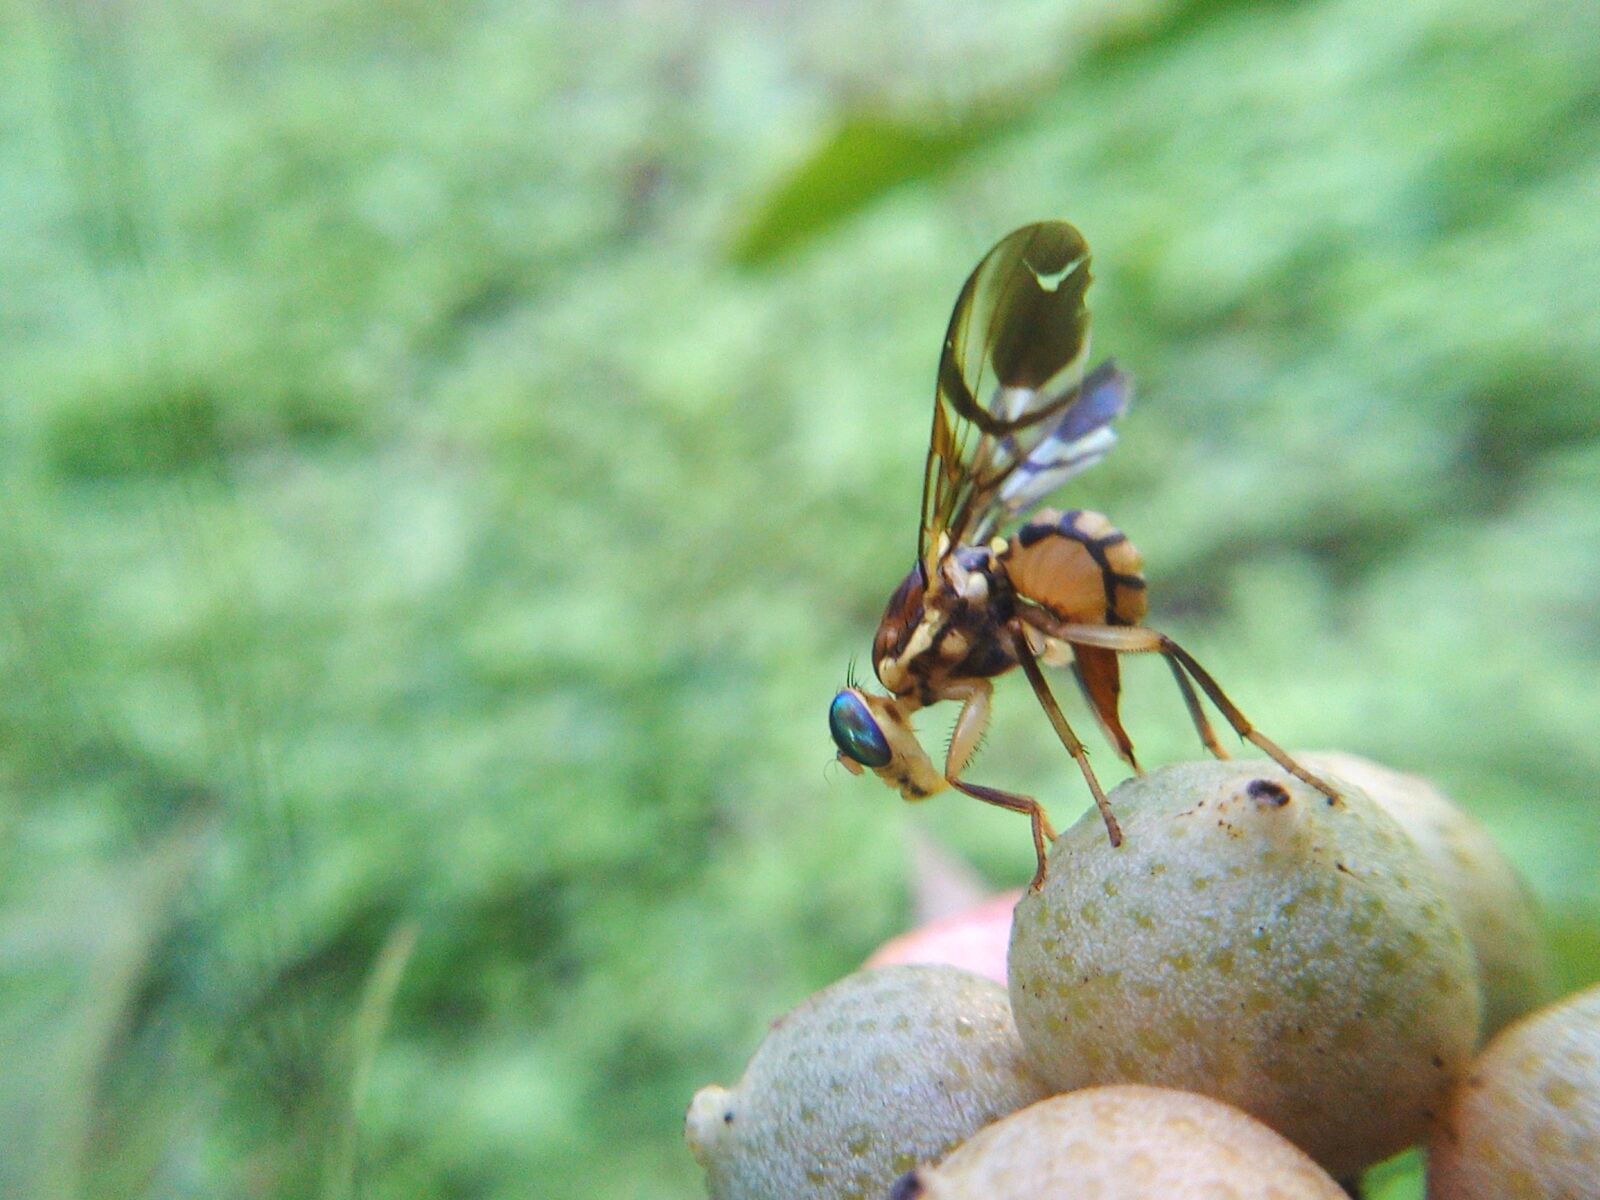 vivo Y21 sample photo. Fly, insect, nature photography